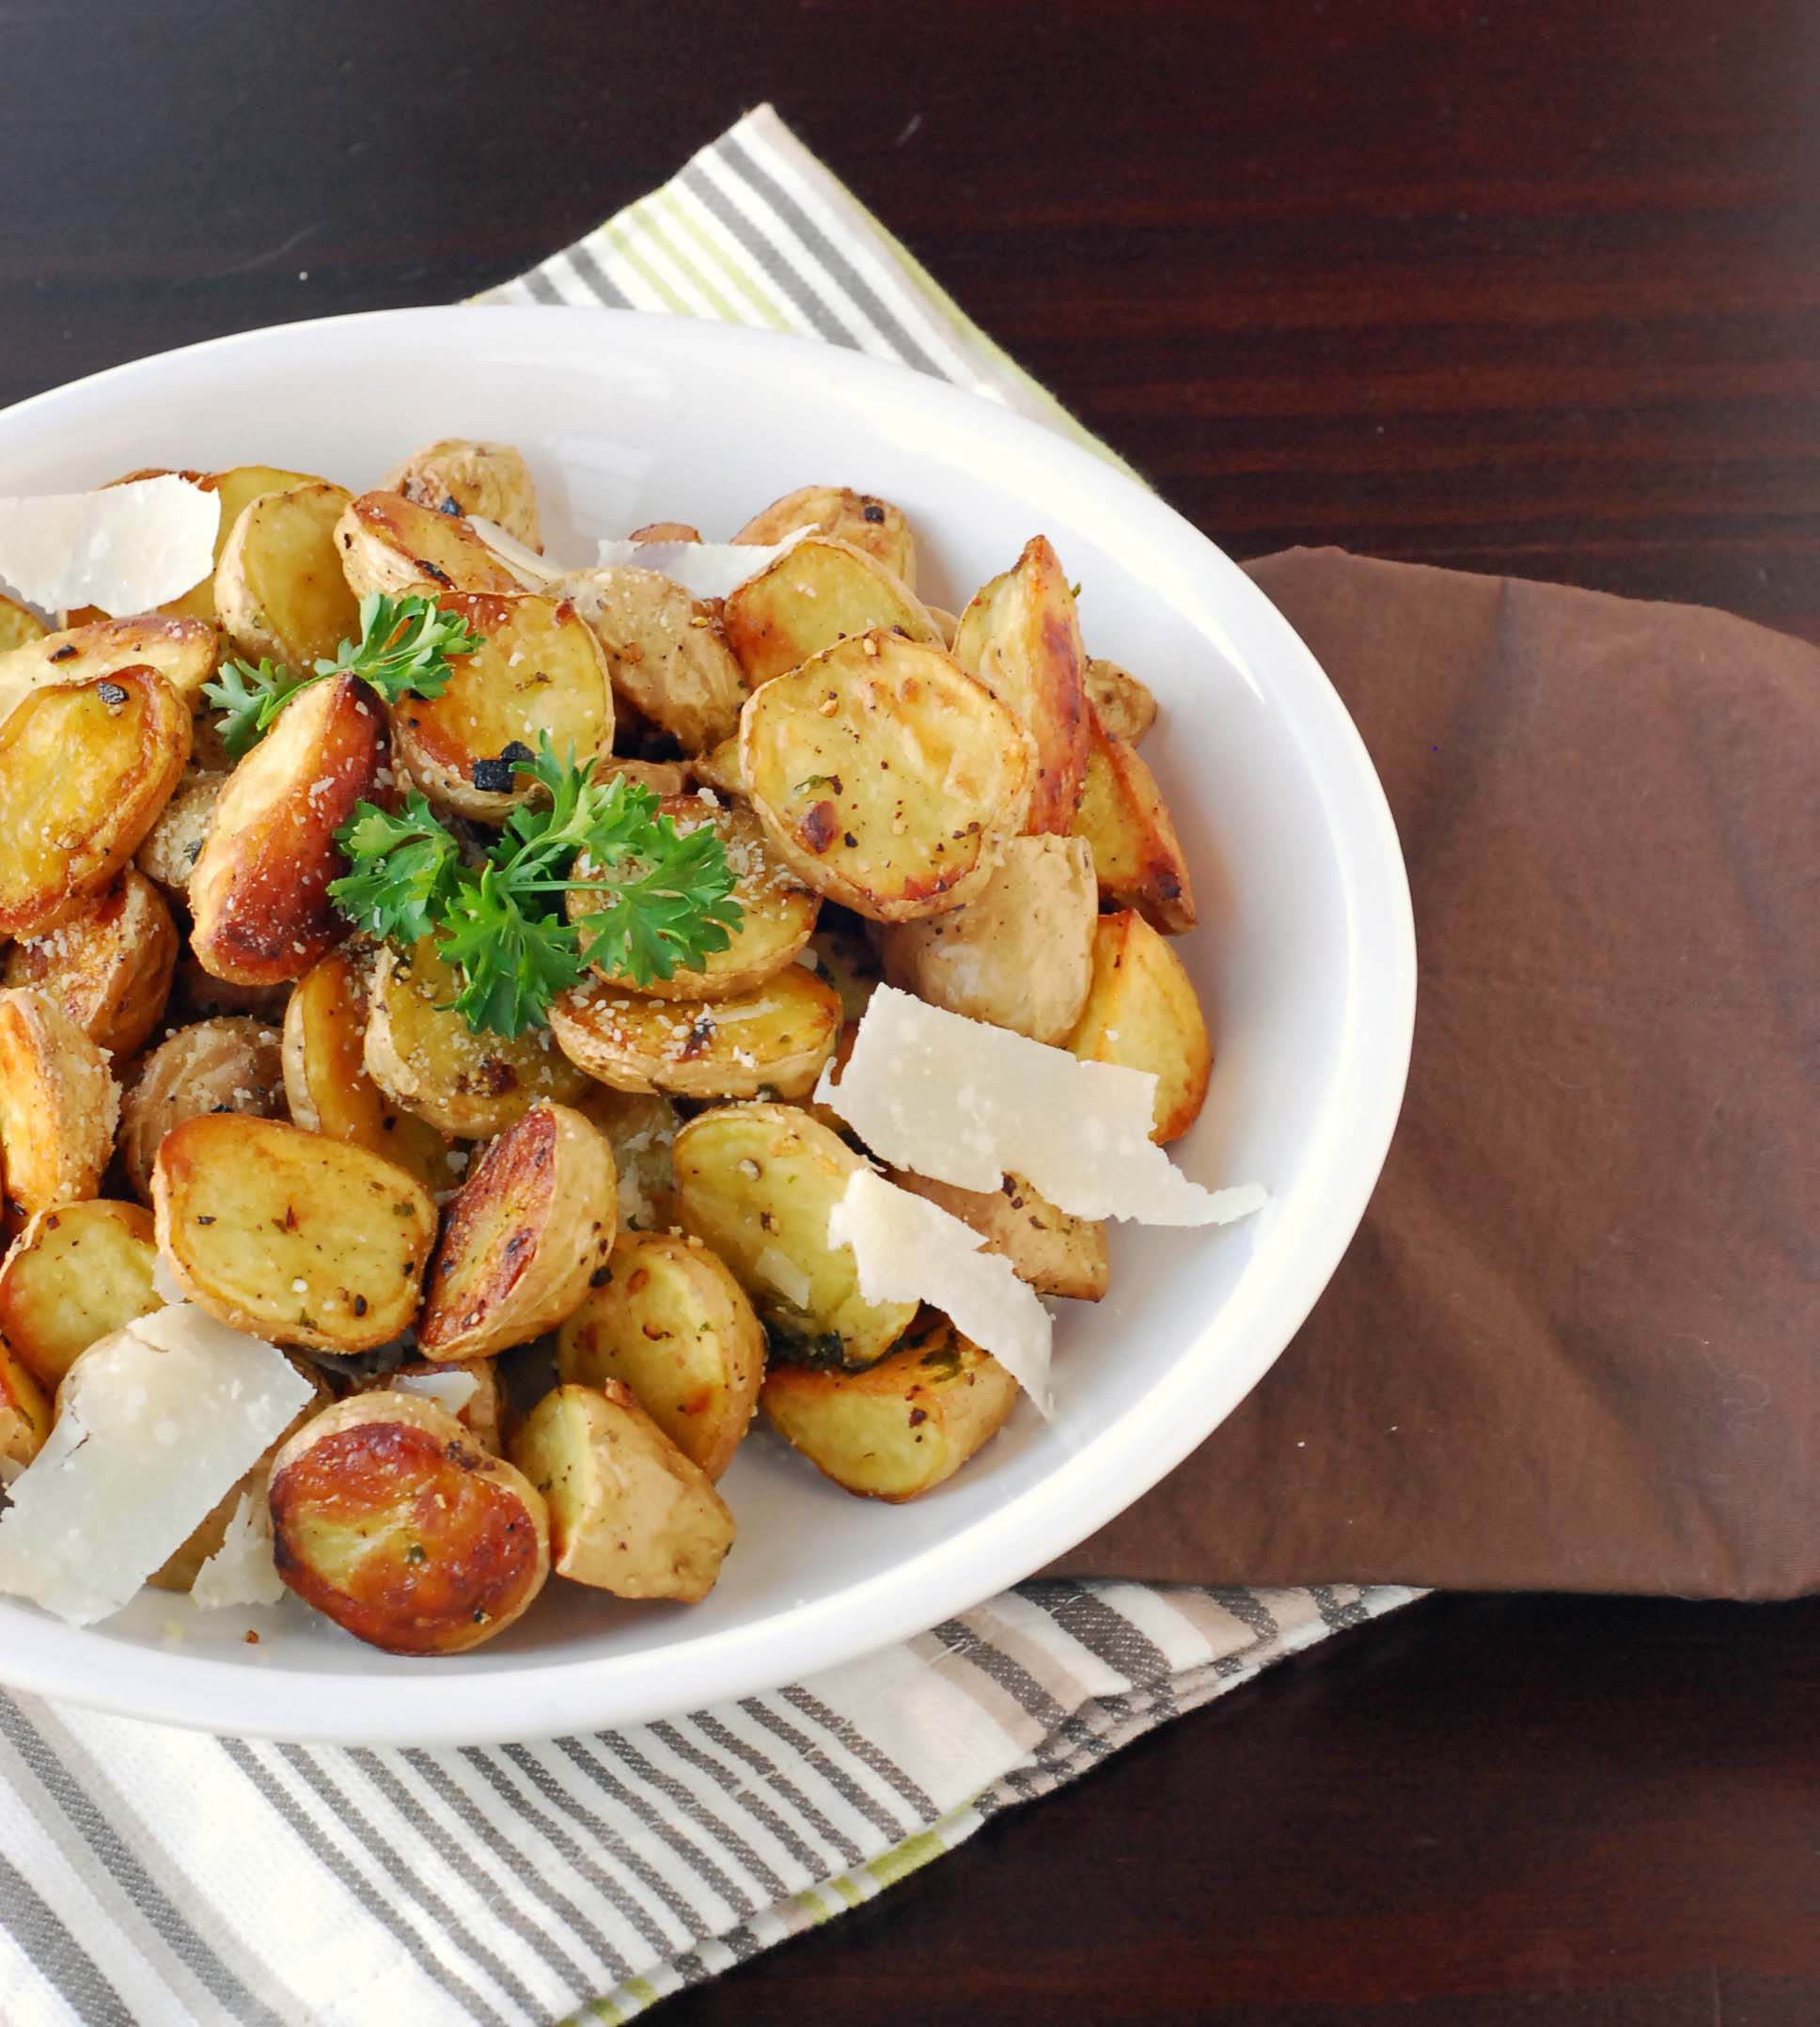 Roasted Baby Potatoes With Parmesan
 Parmesan Roasted Baby Potatoes with Parsley